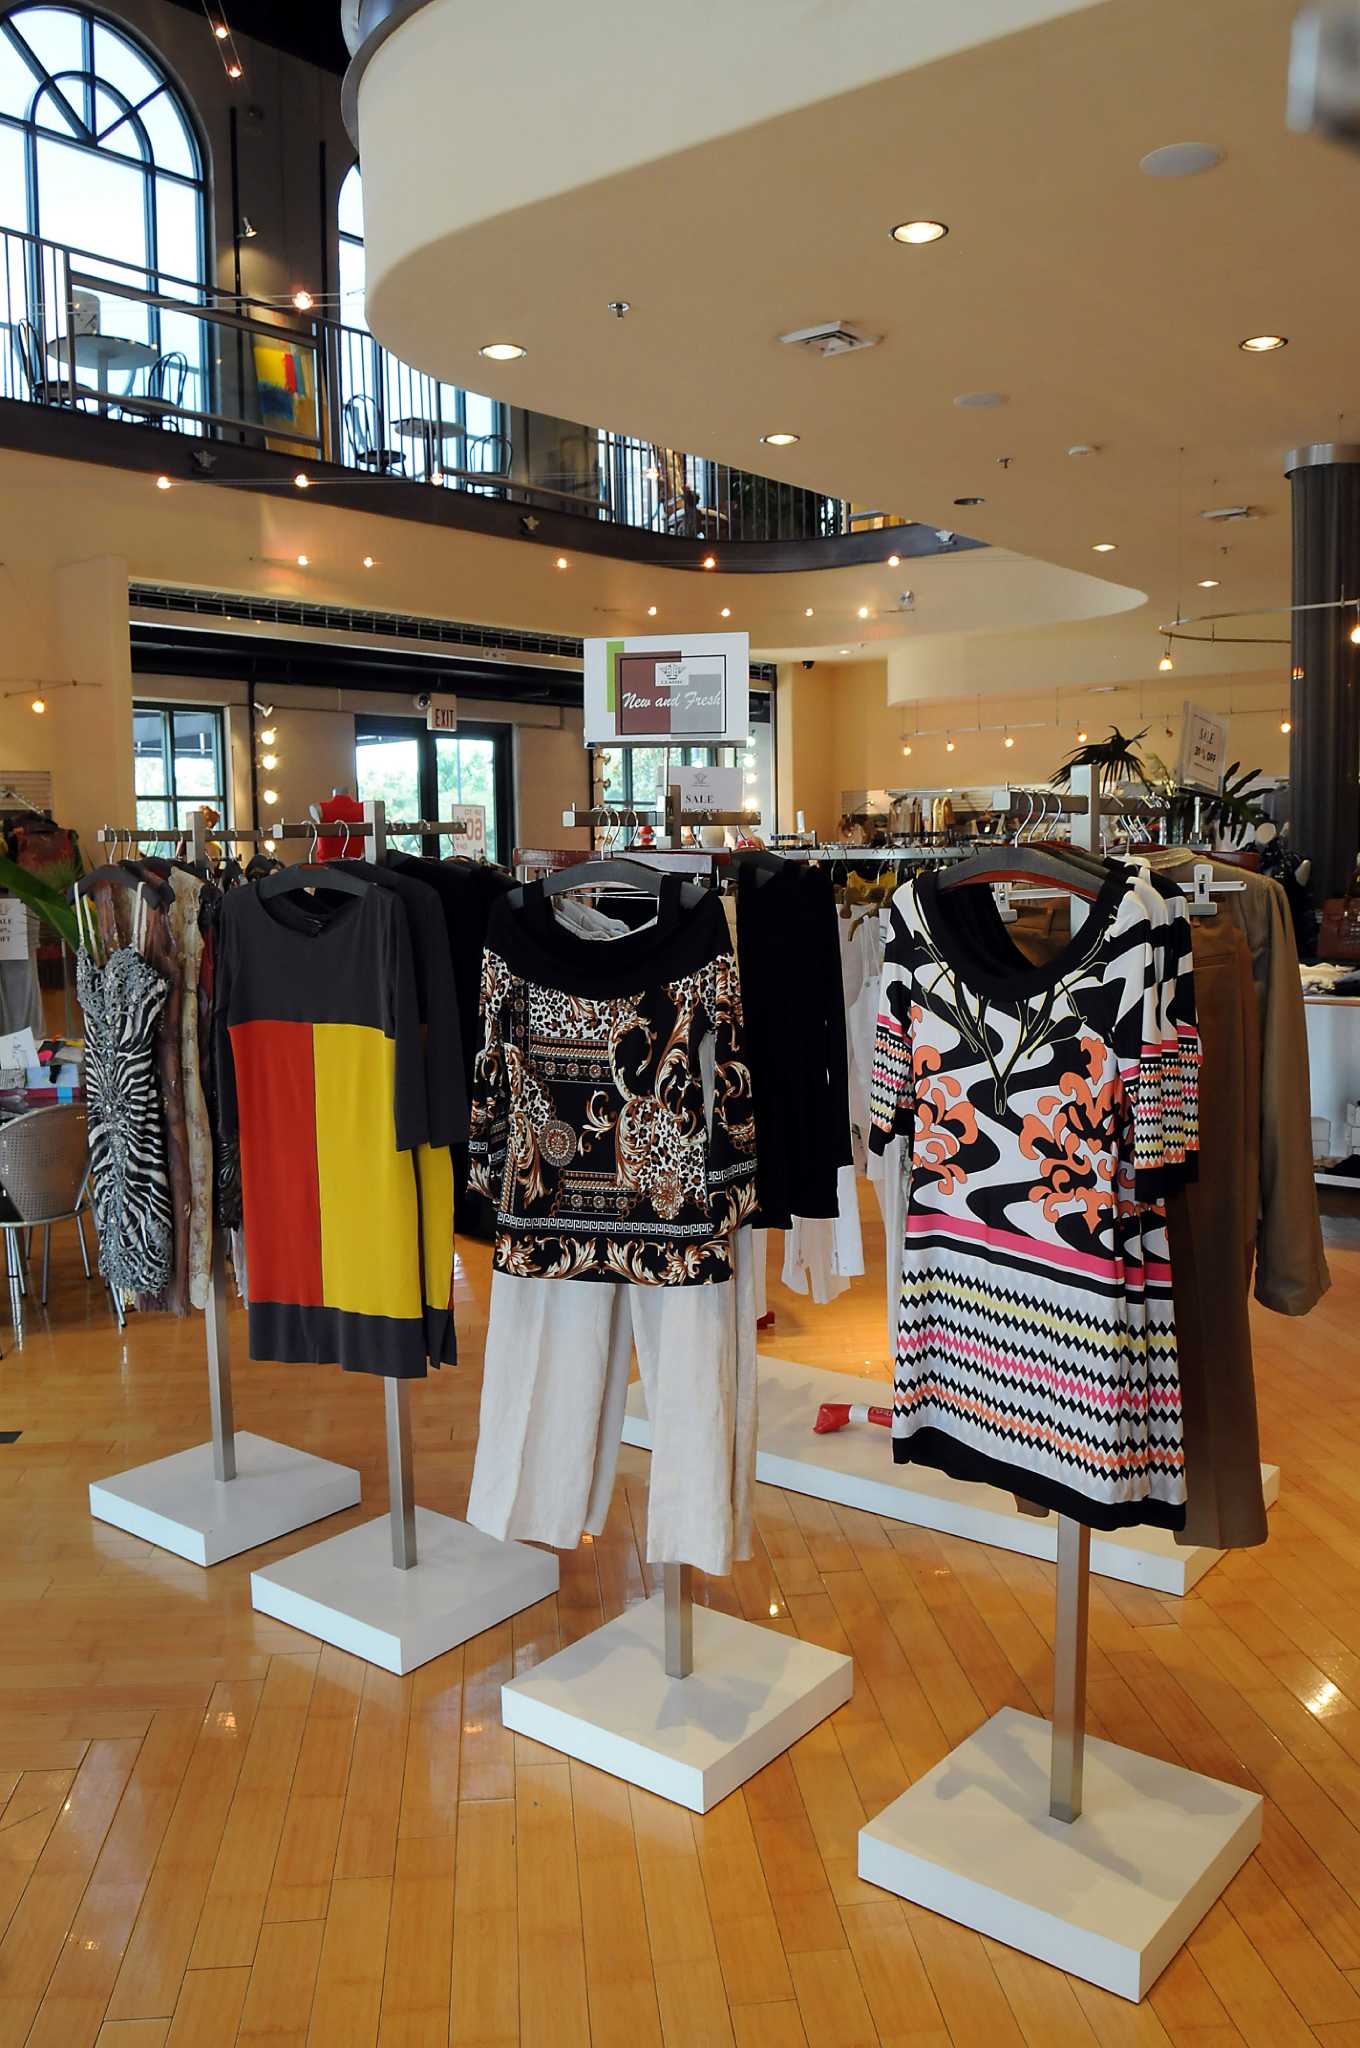 Welcome to luxury fashion resale: Discerning customers beckon to